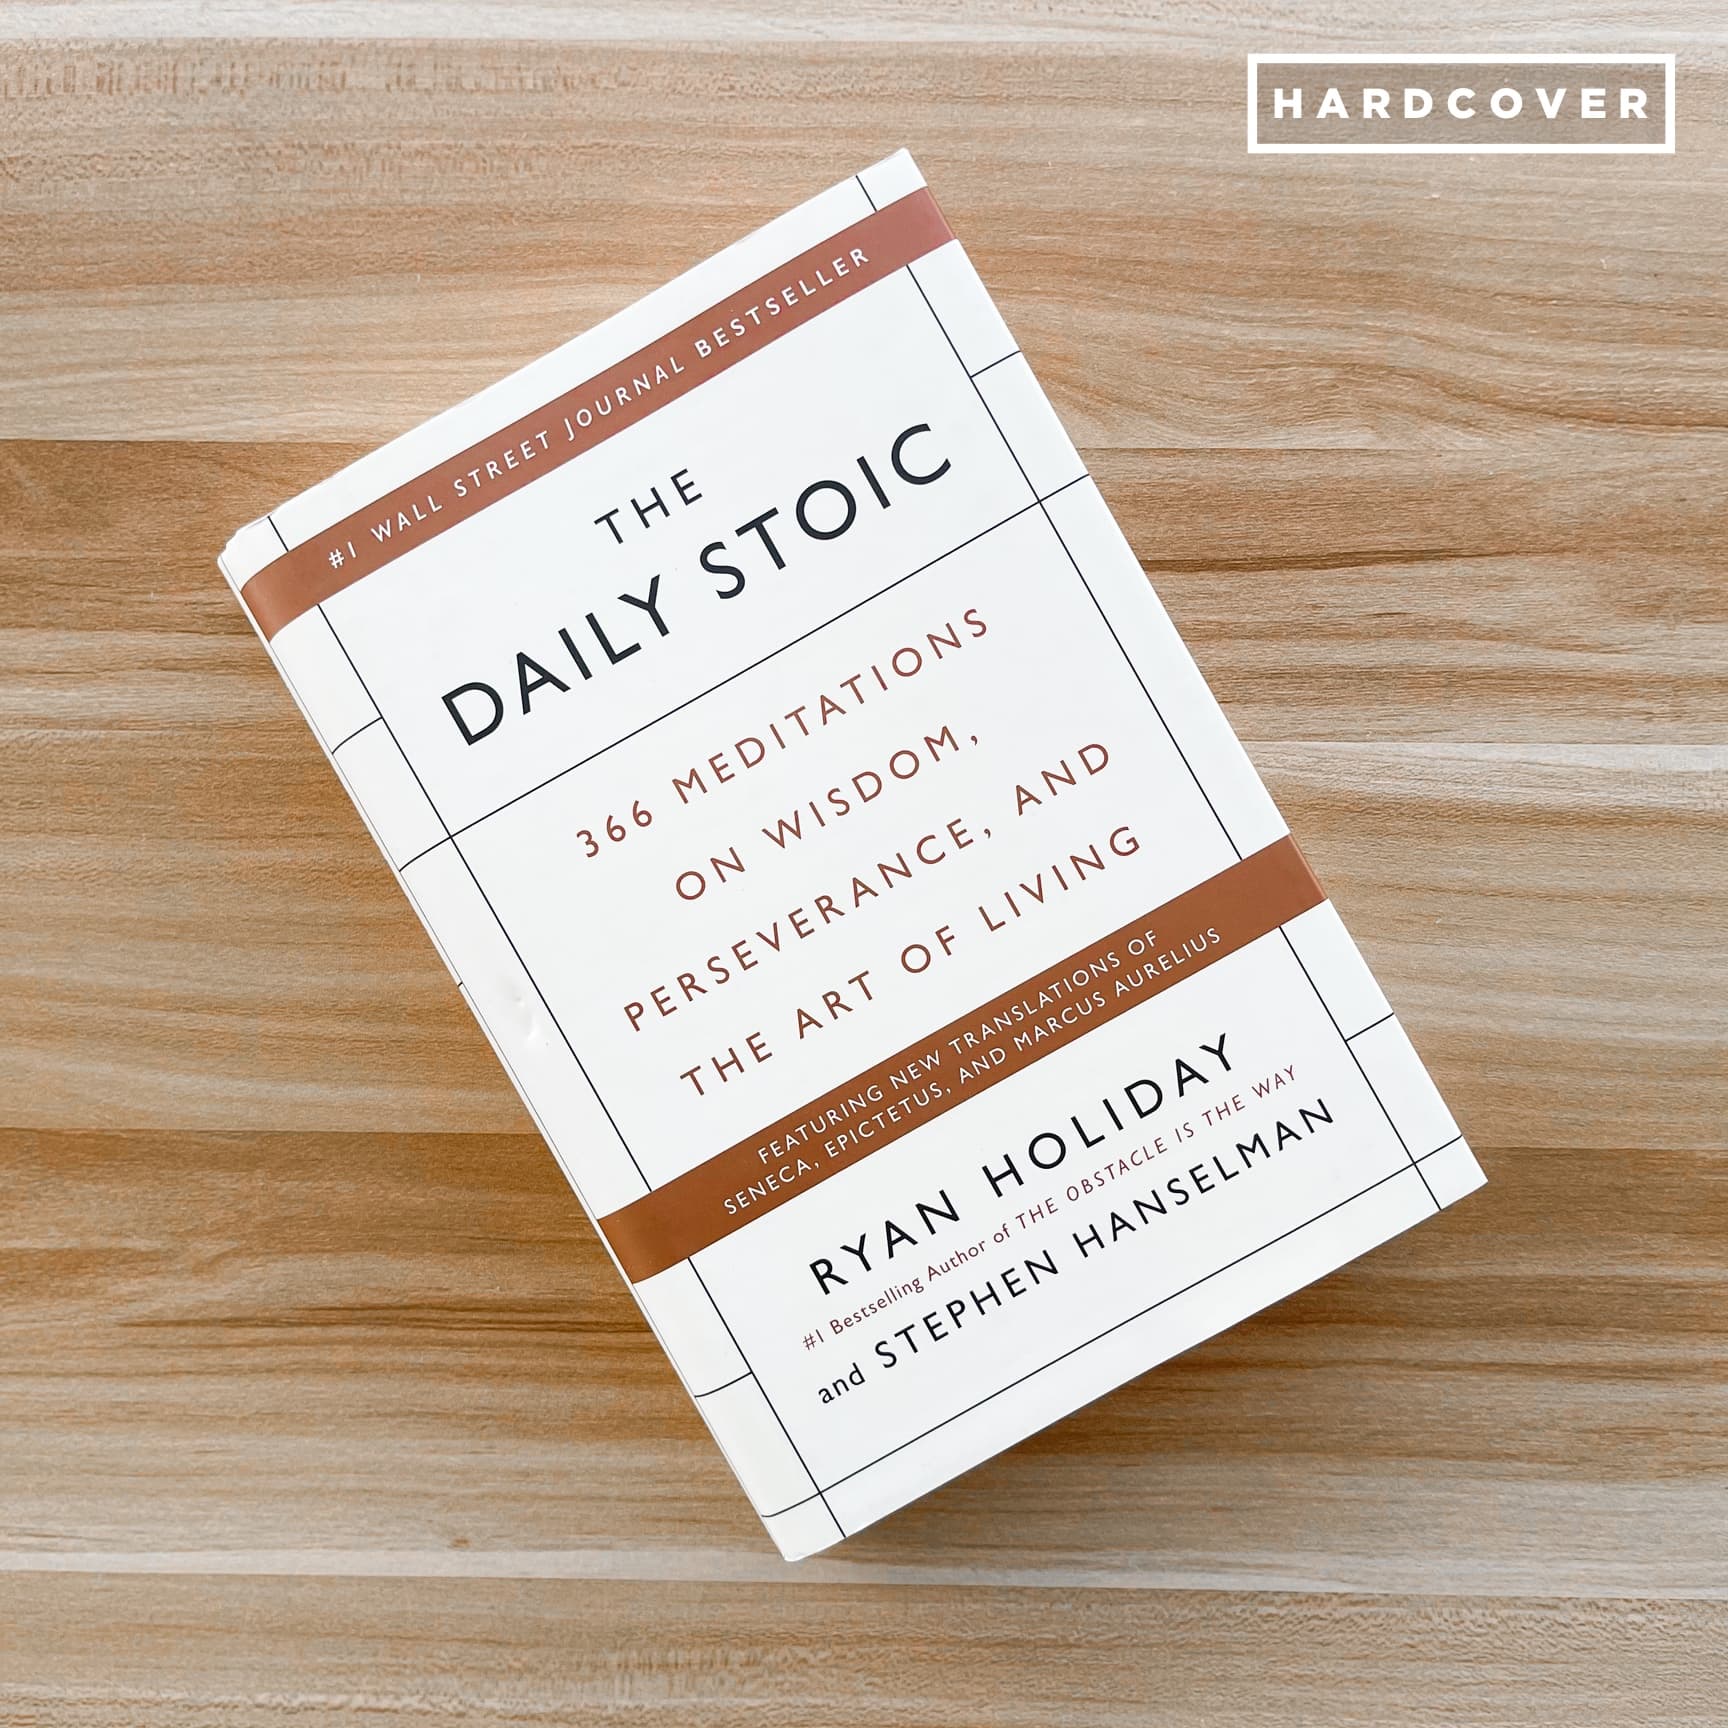 All books – Daily Stoic Store